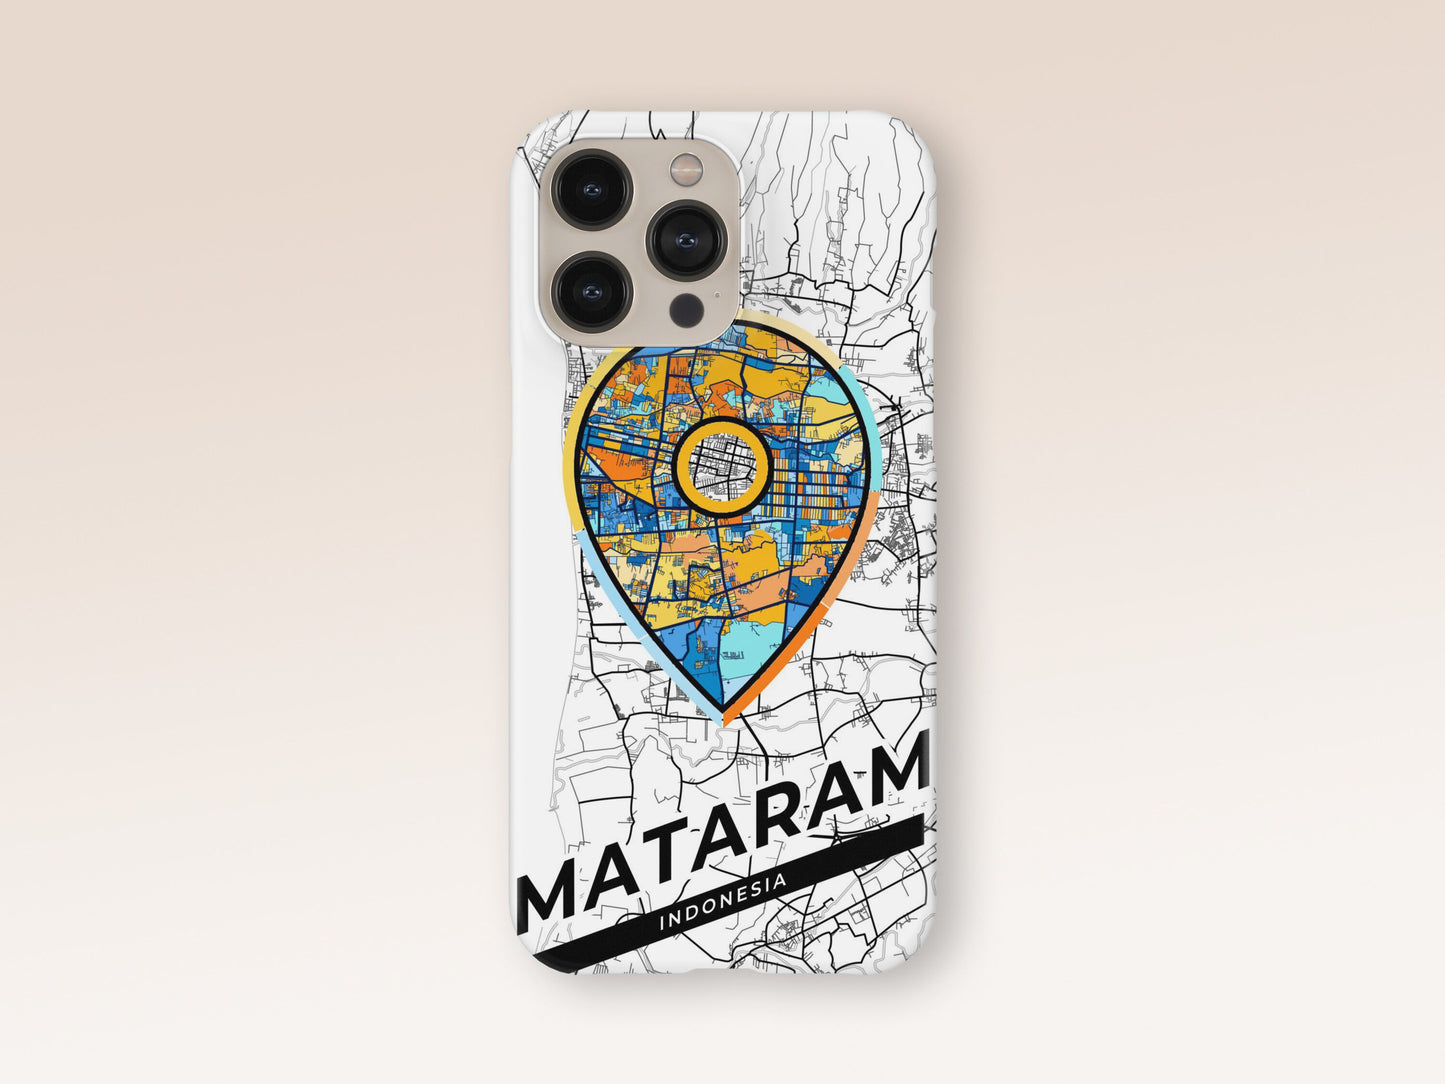 Mataram Indonesia slim phone case with colorful icon. Birthday, wedding or housewarming gift. Couple match cases. 1